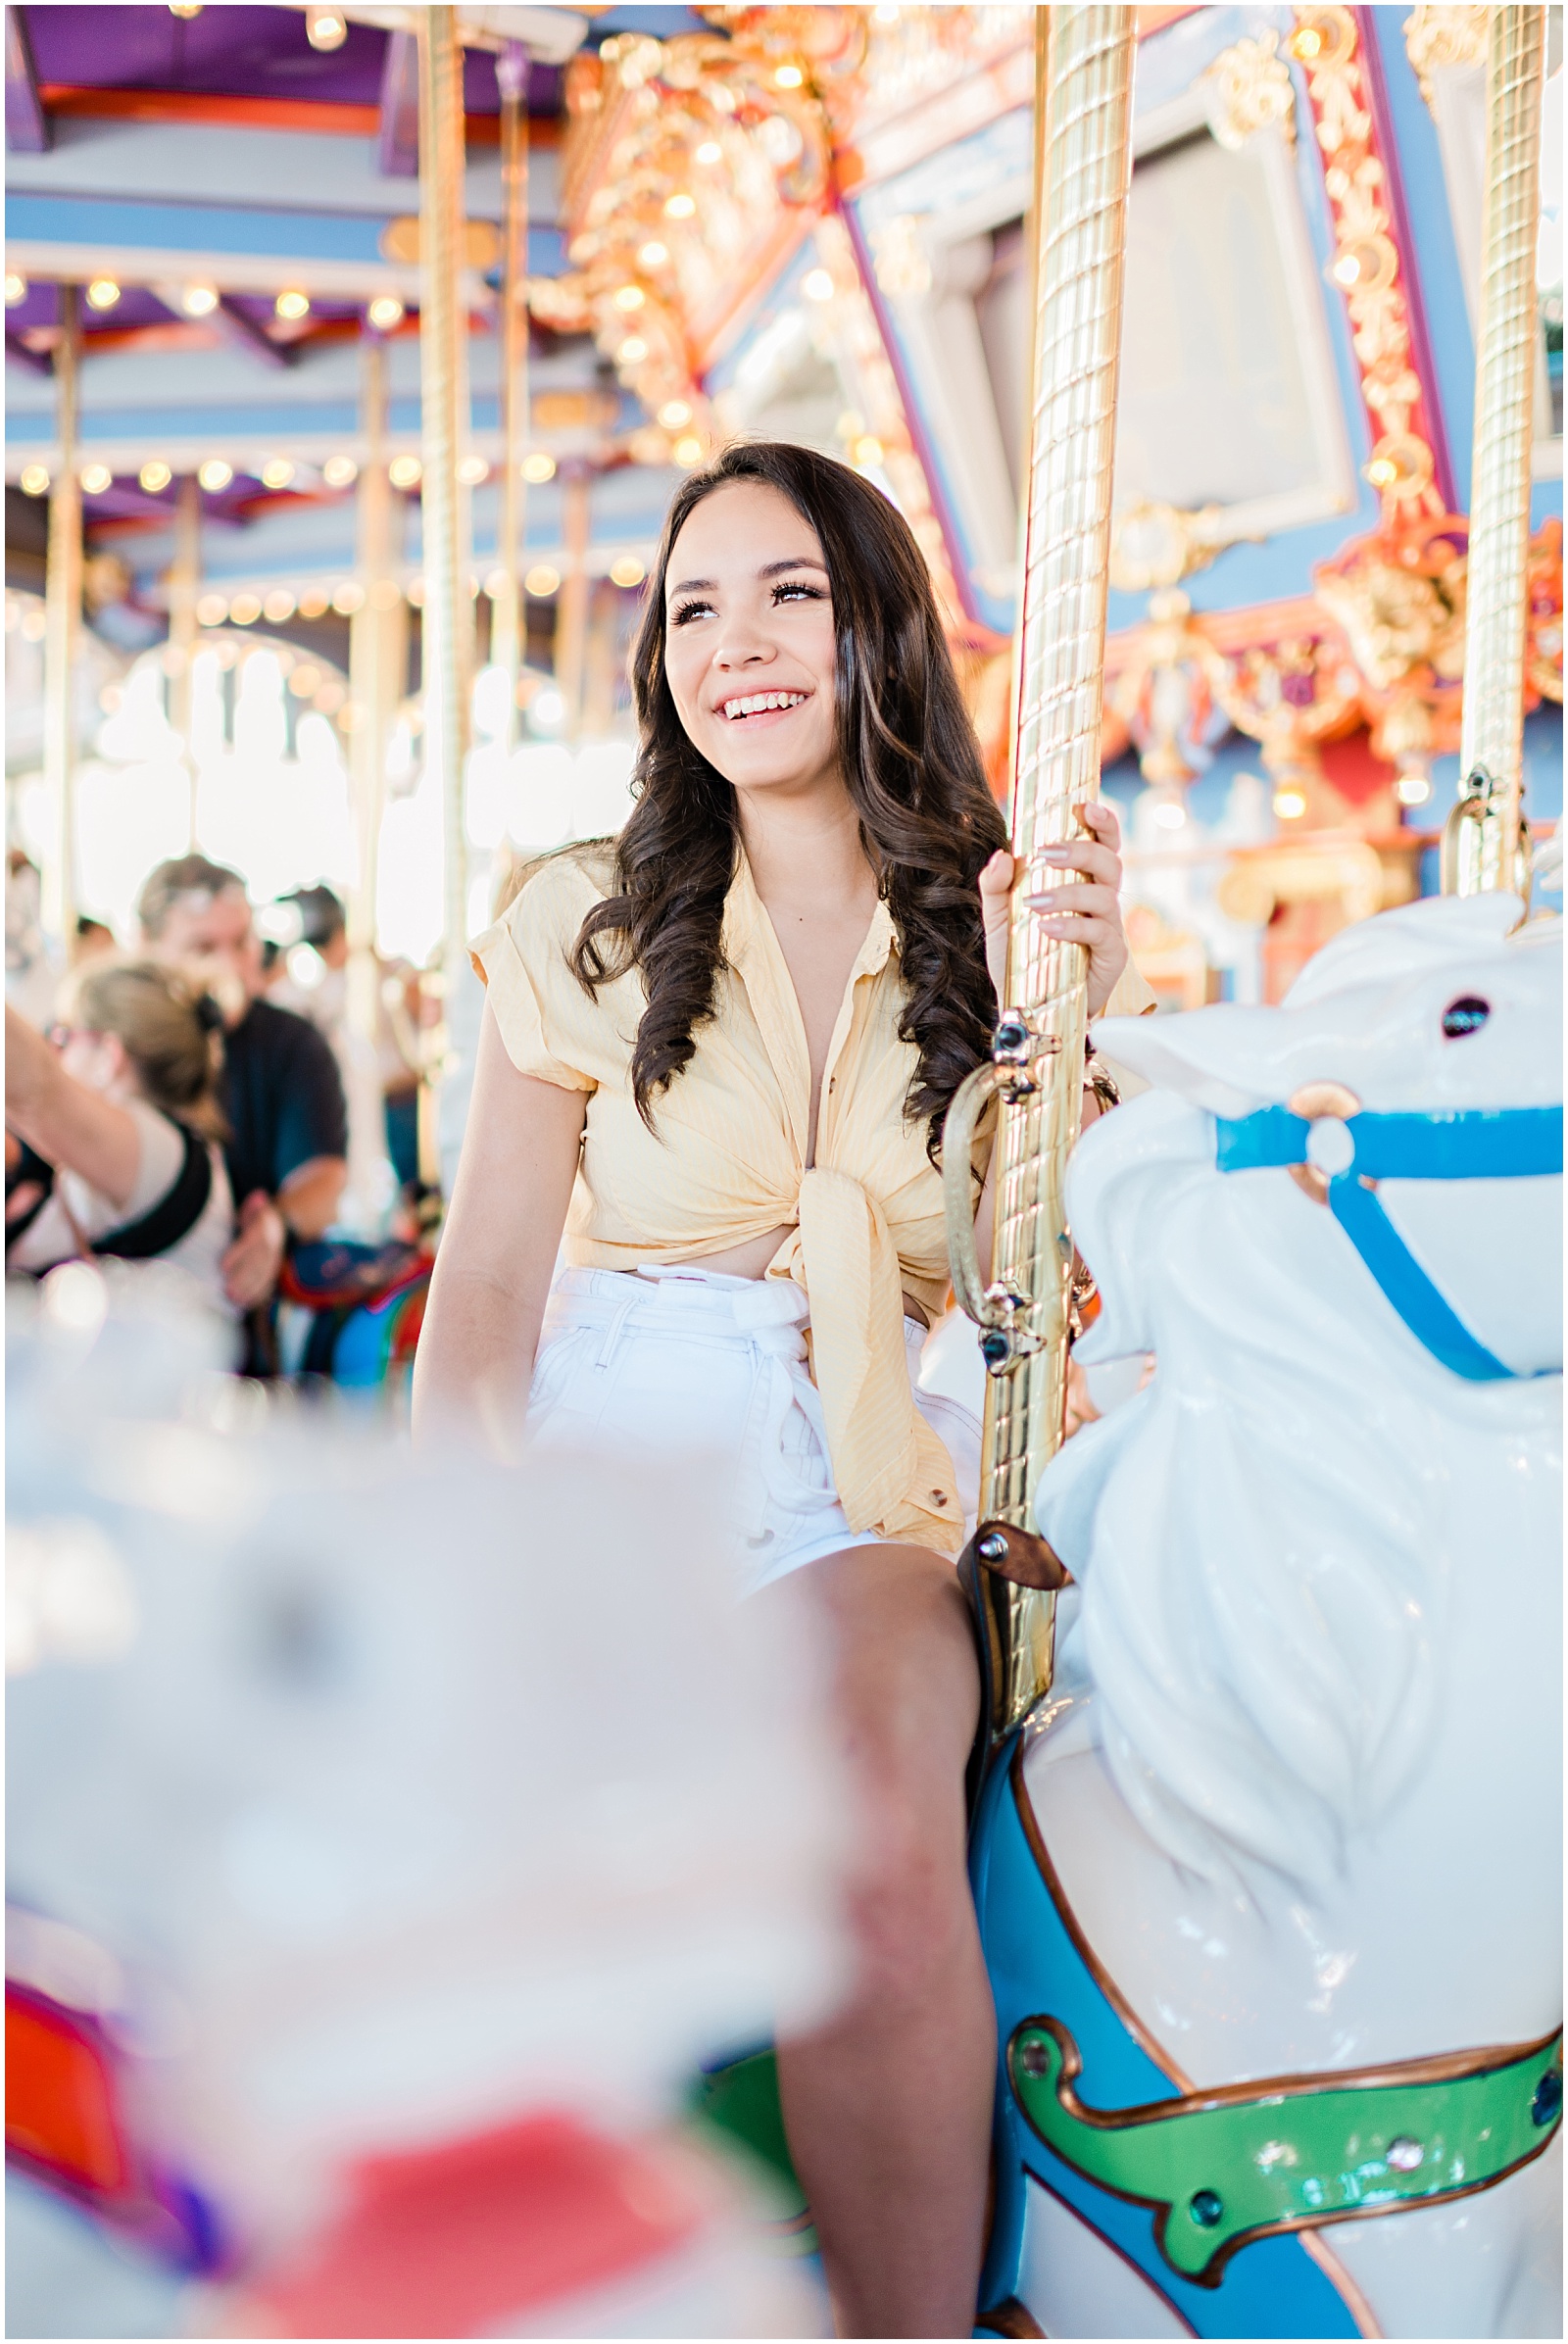 Disneyland Carousel Senior Session.Images by Mollie Jane Photography. To see more go to www.molliejanephotography.com.